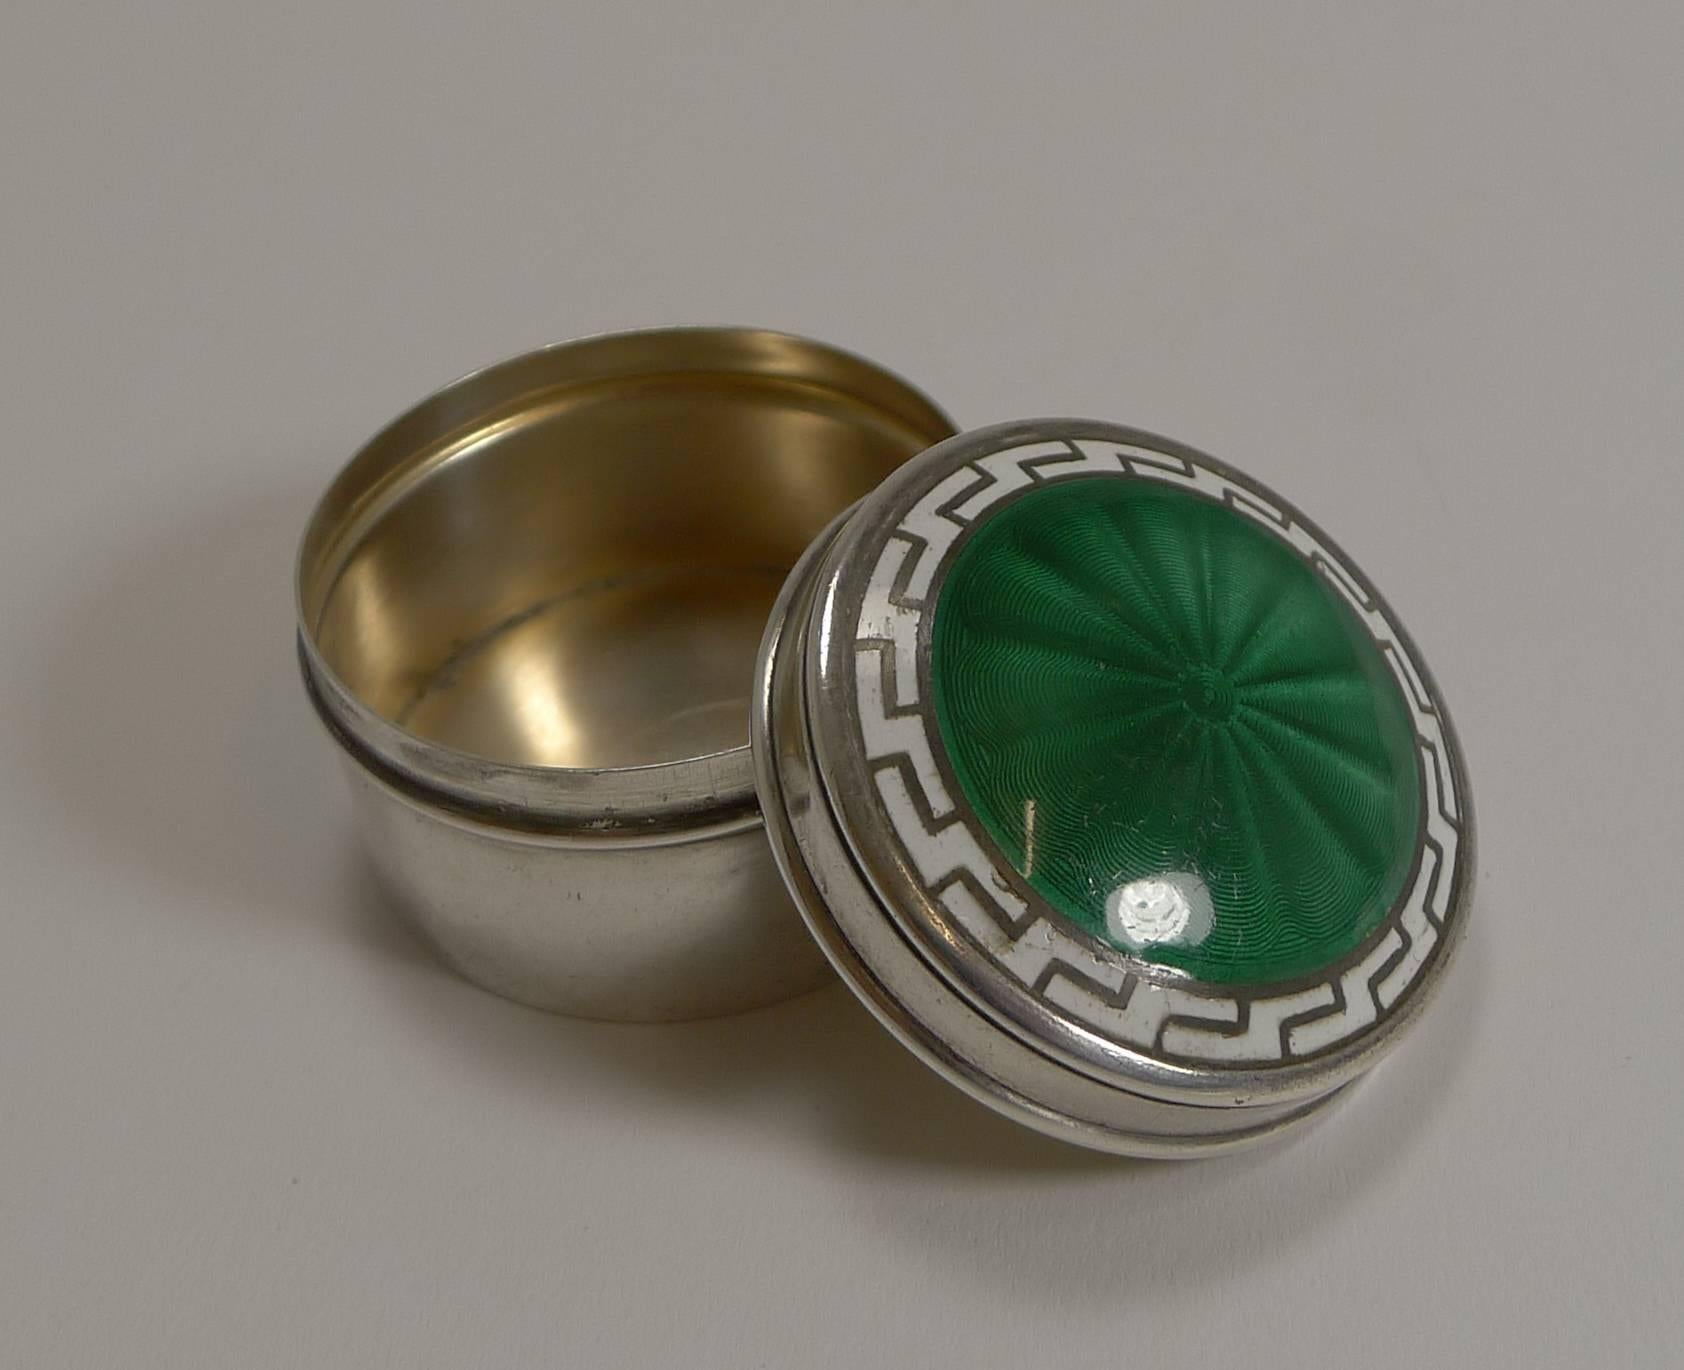 Antique English Sterling Silver and Enamel Box 1